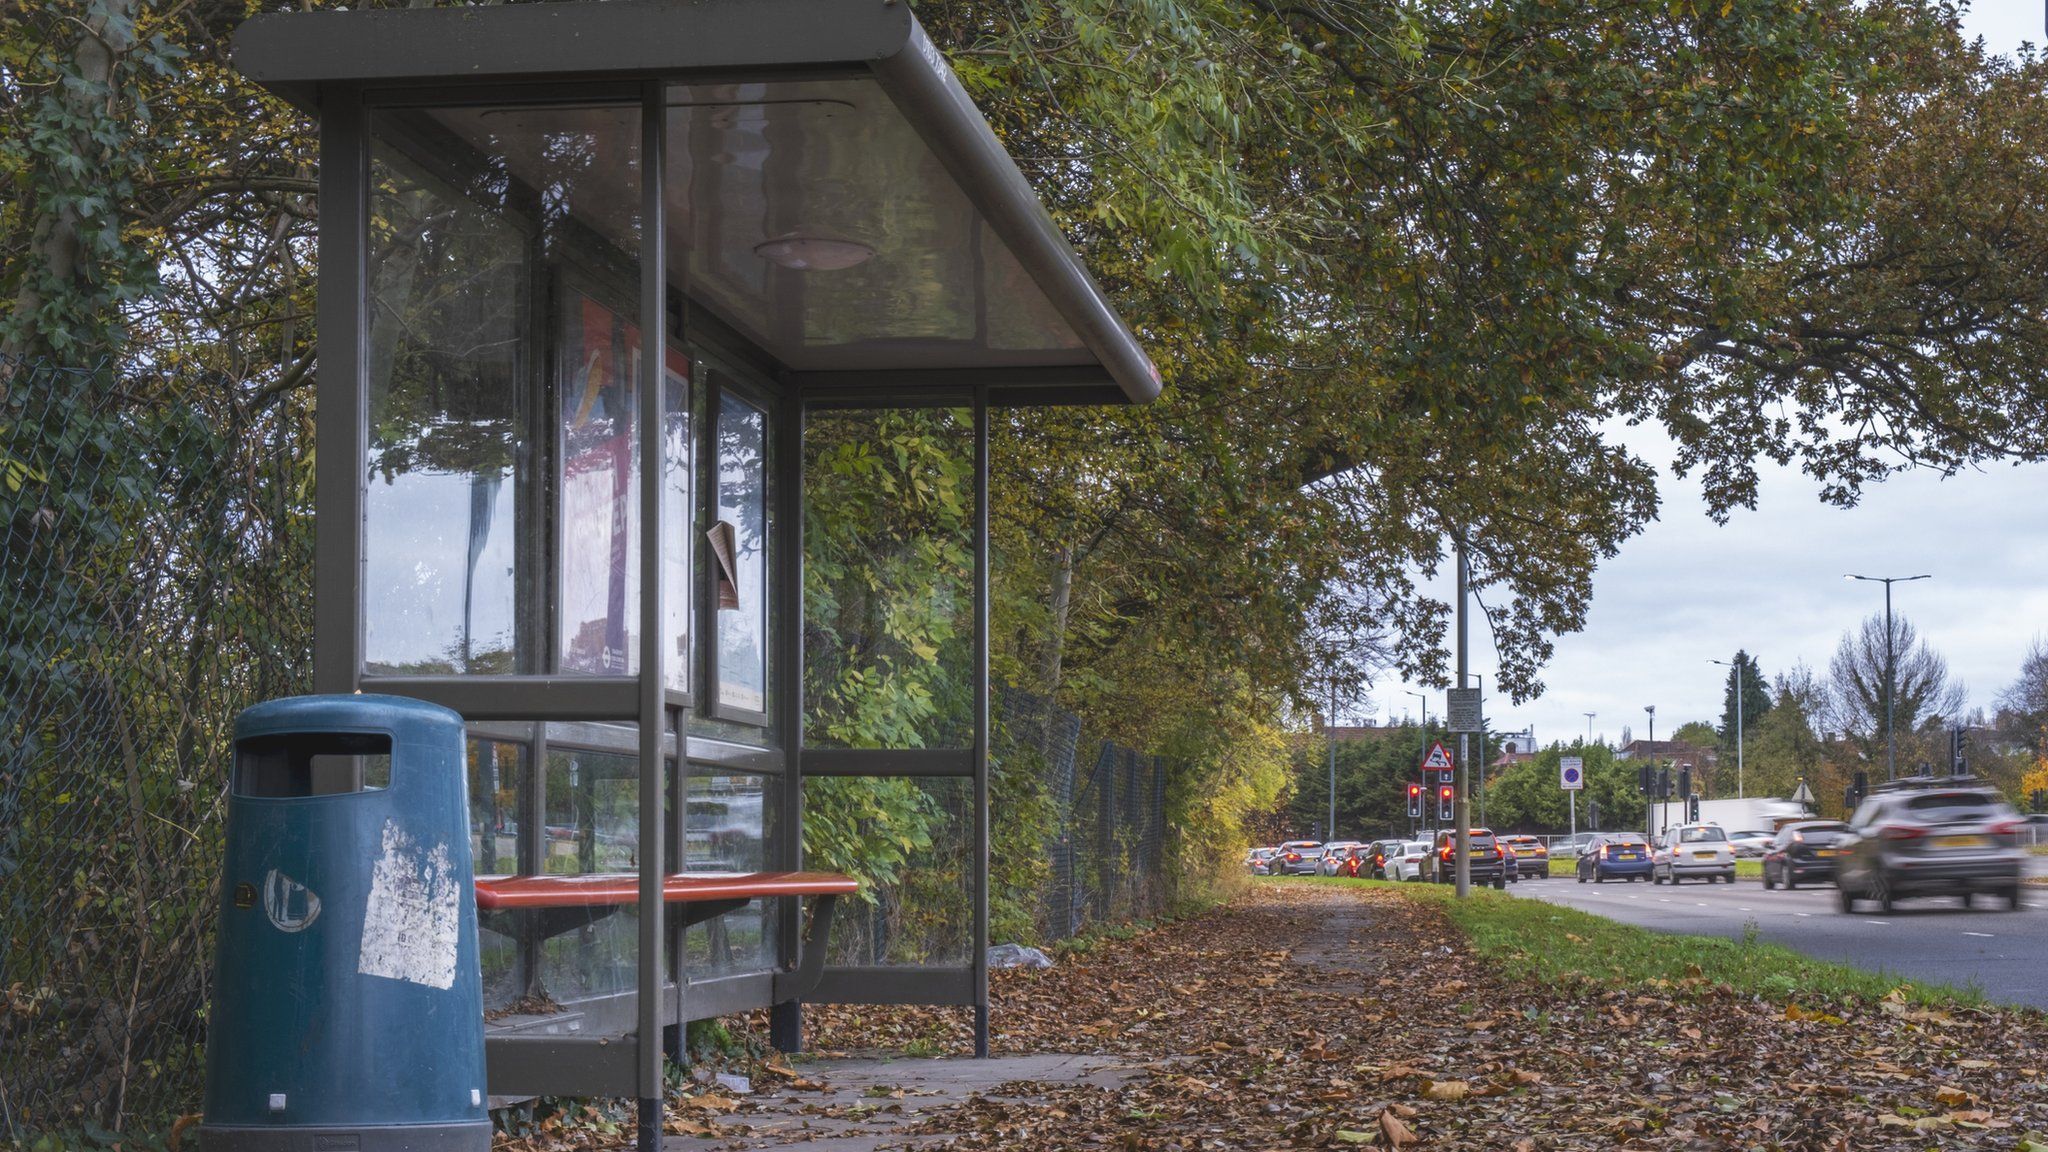 A generic image of a bus stop